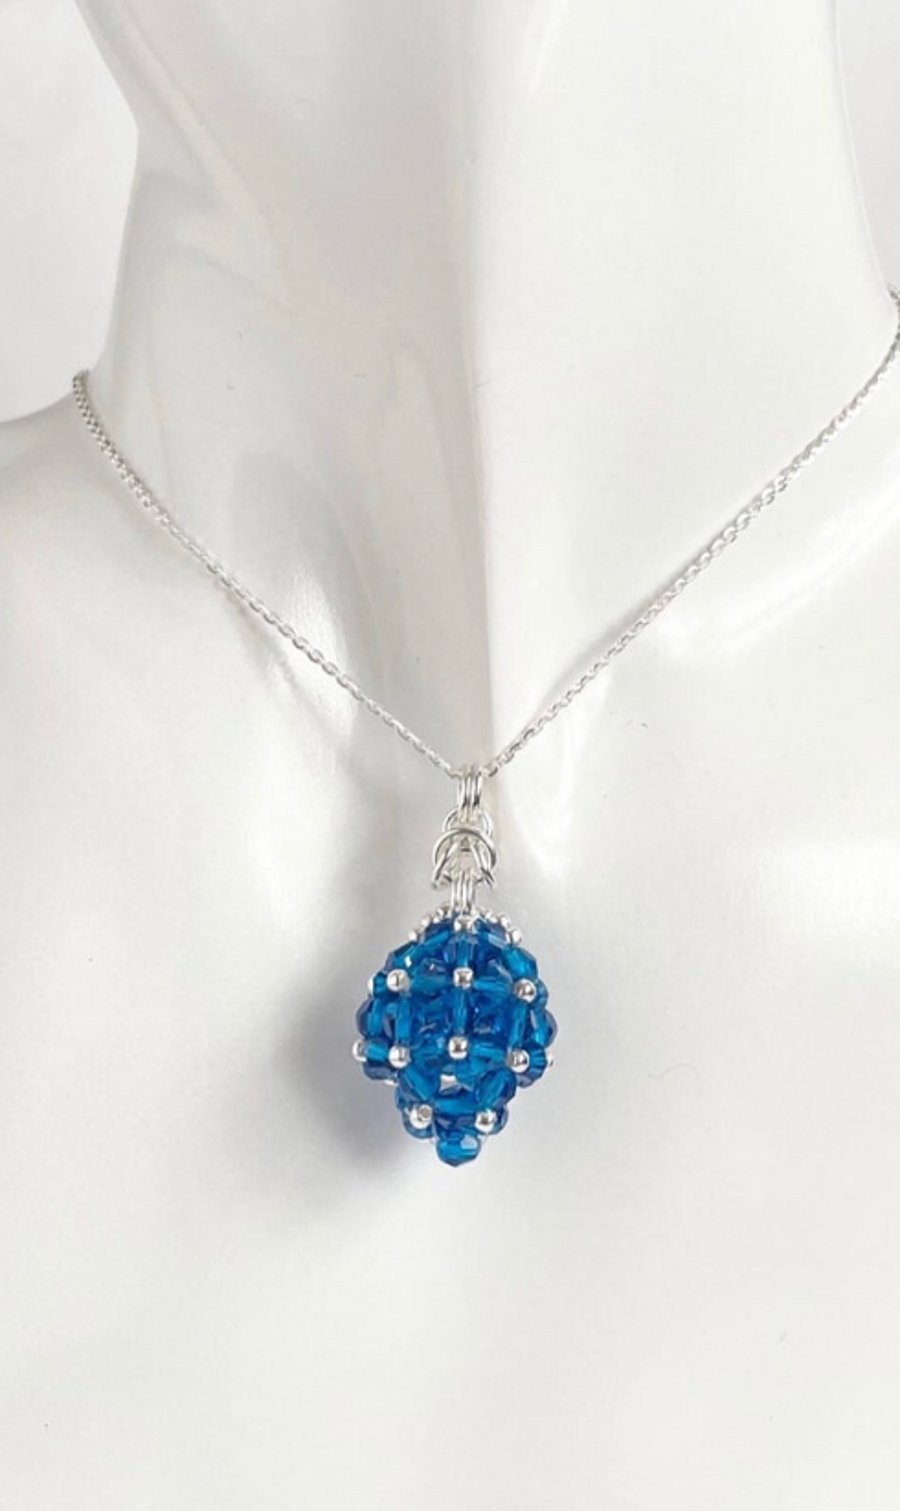 Crystal Blue Egg Sterling Silver Pendant, with an 18 Inch Chain